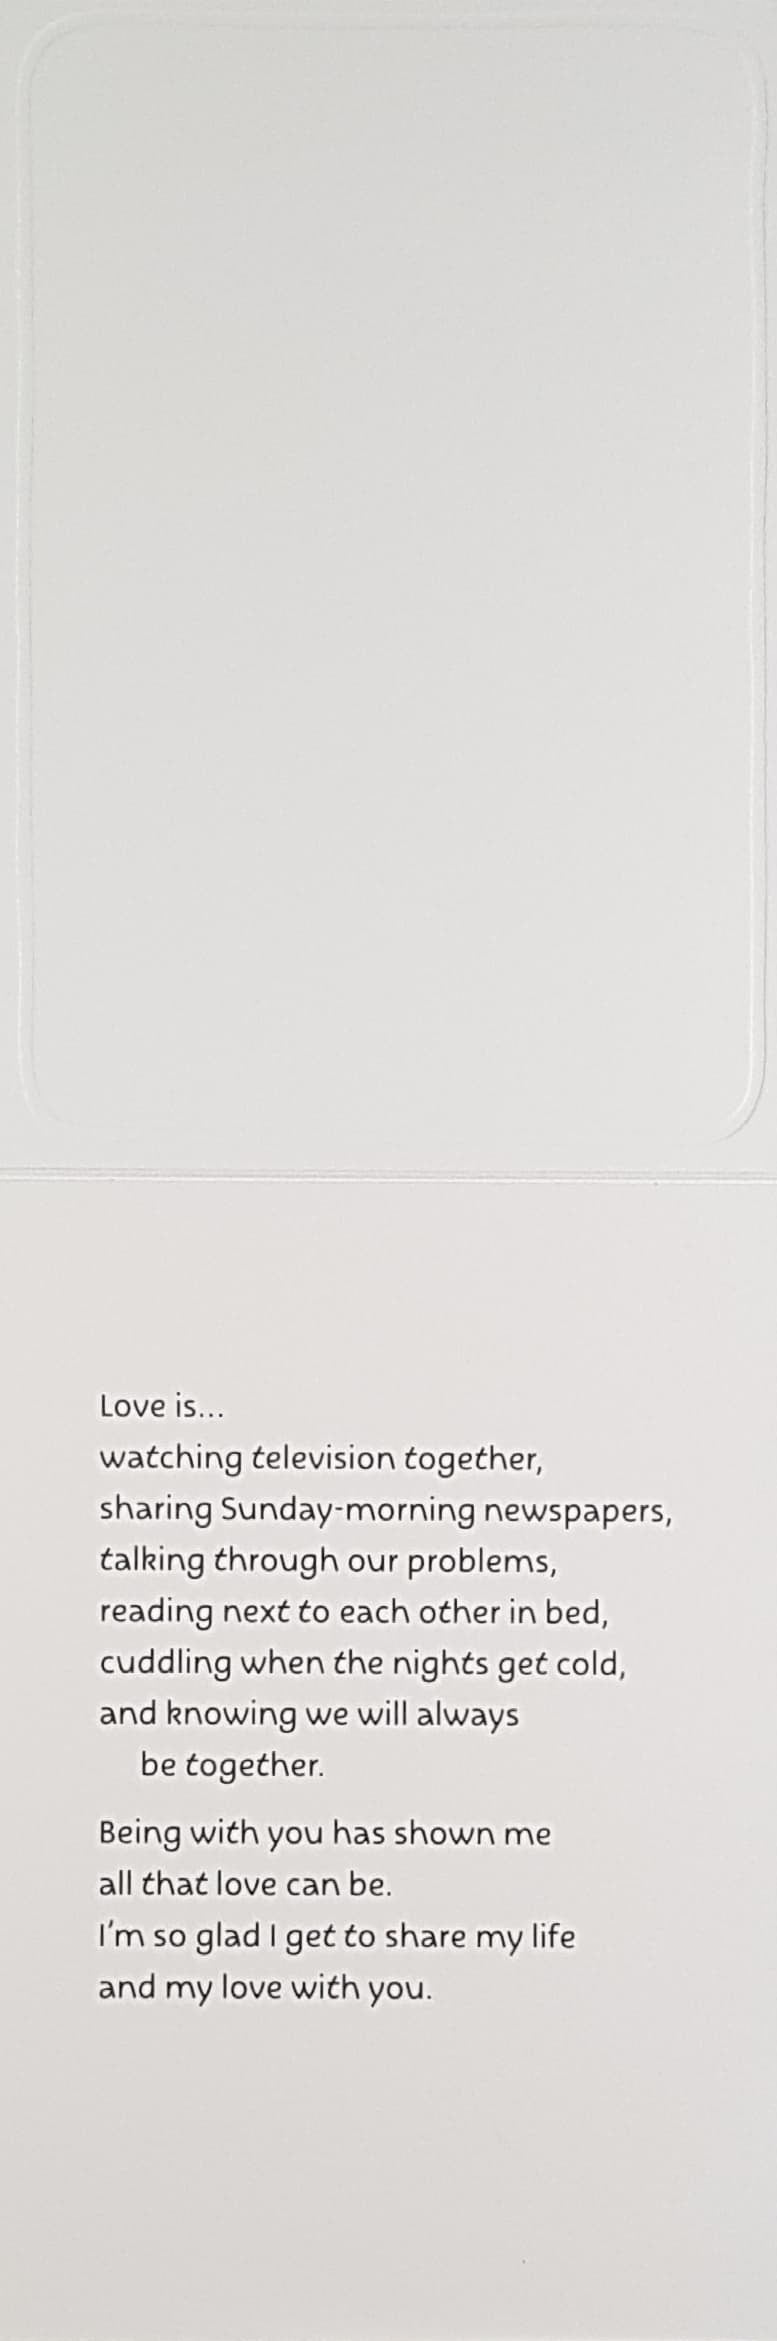 Blue Mountain Arts Card - For My Soul Mate, My Lover, My Friend